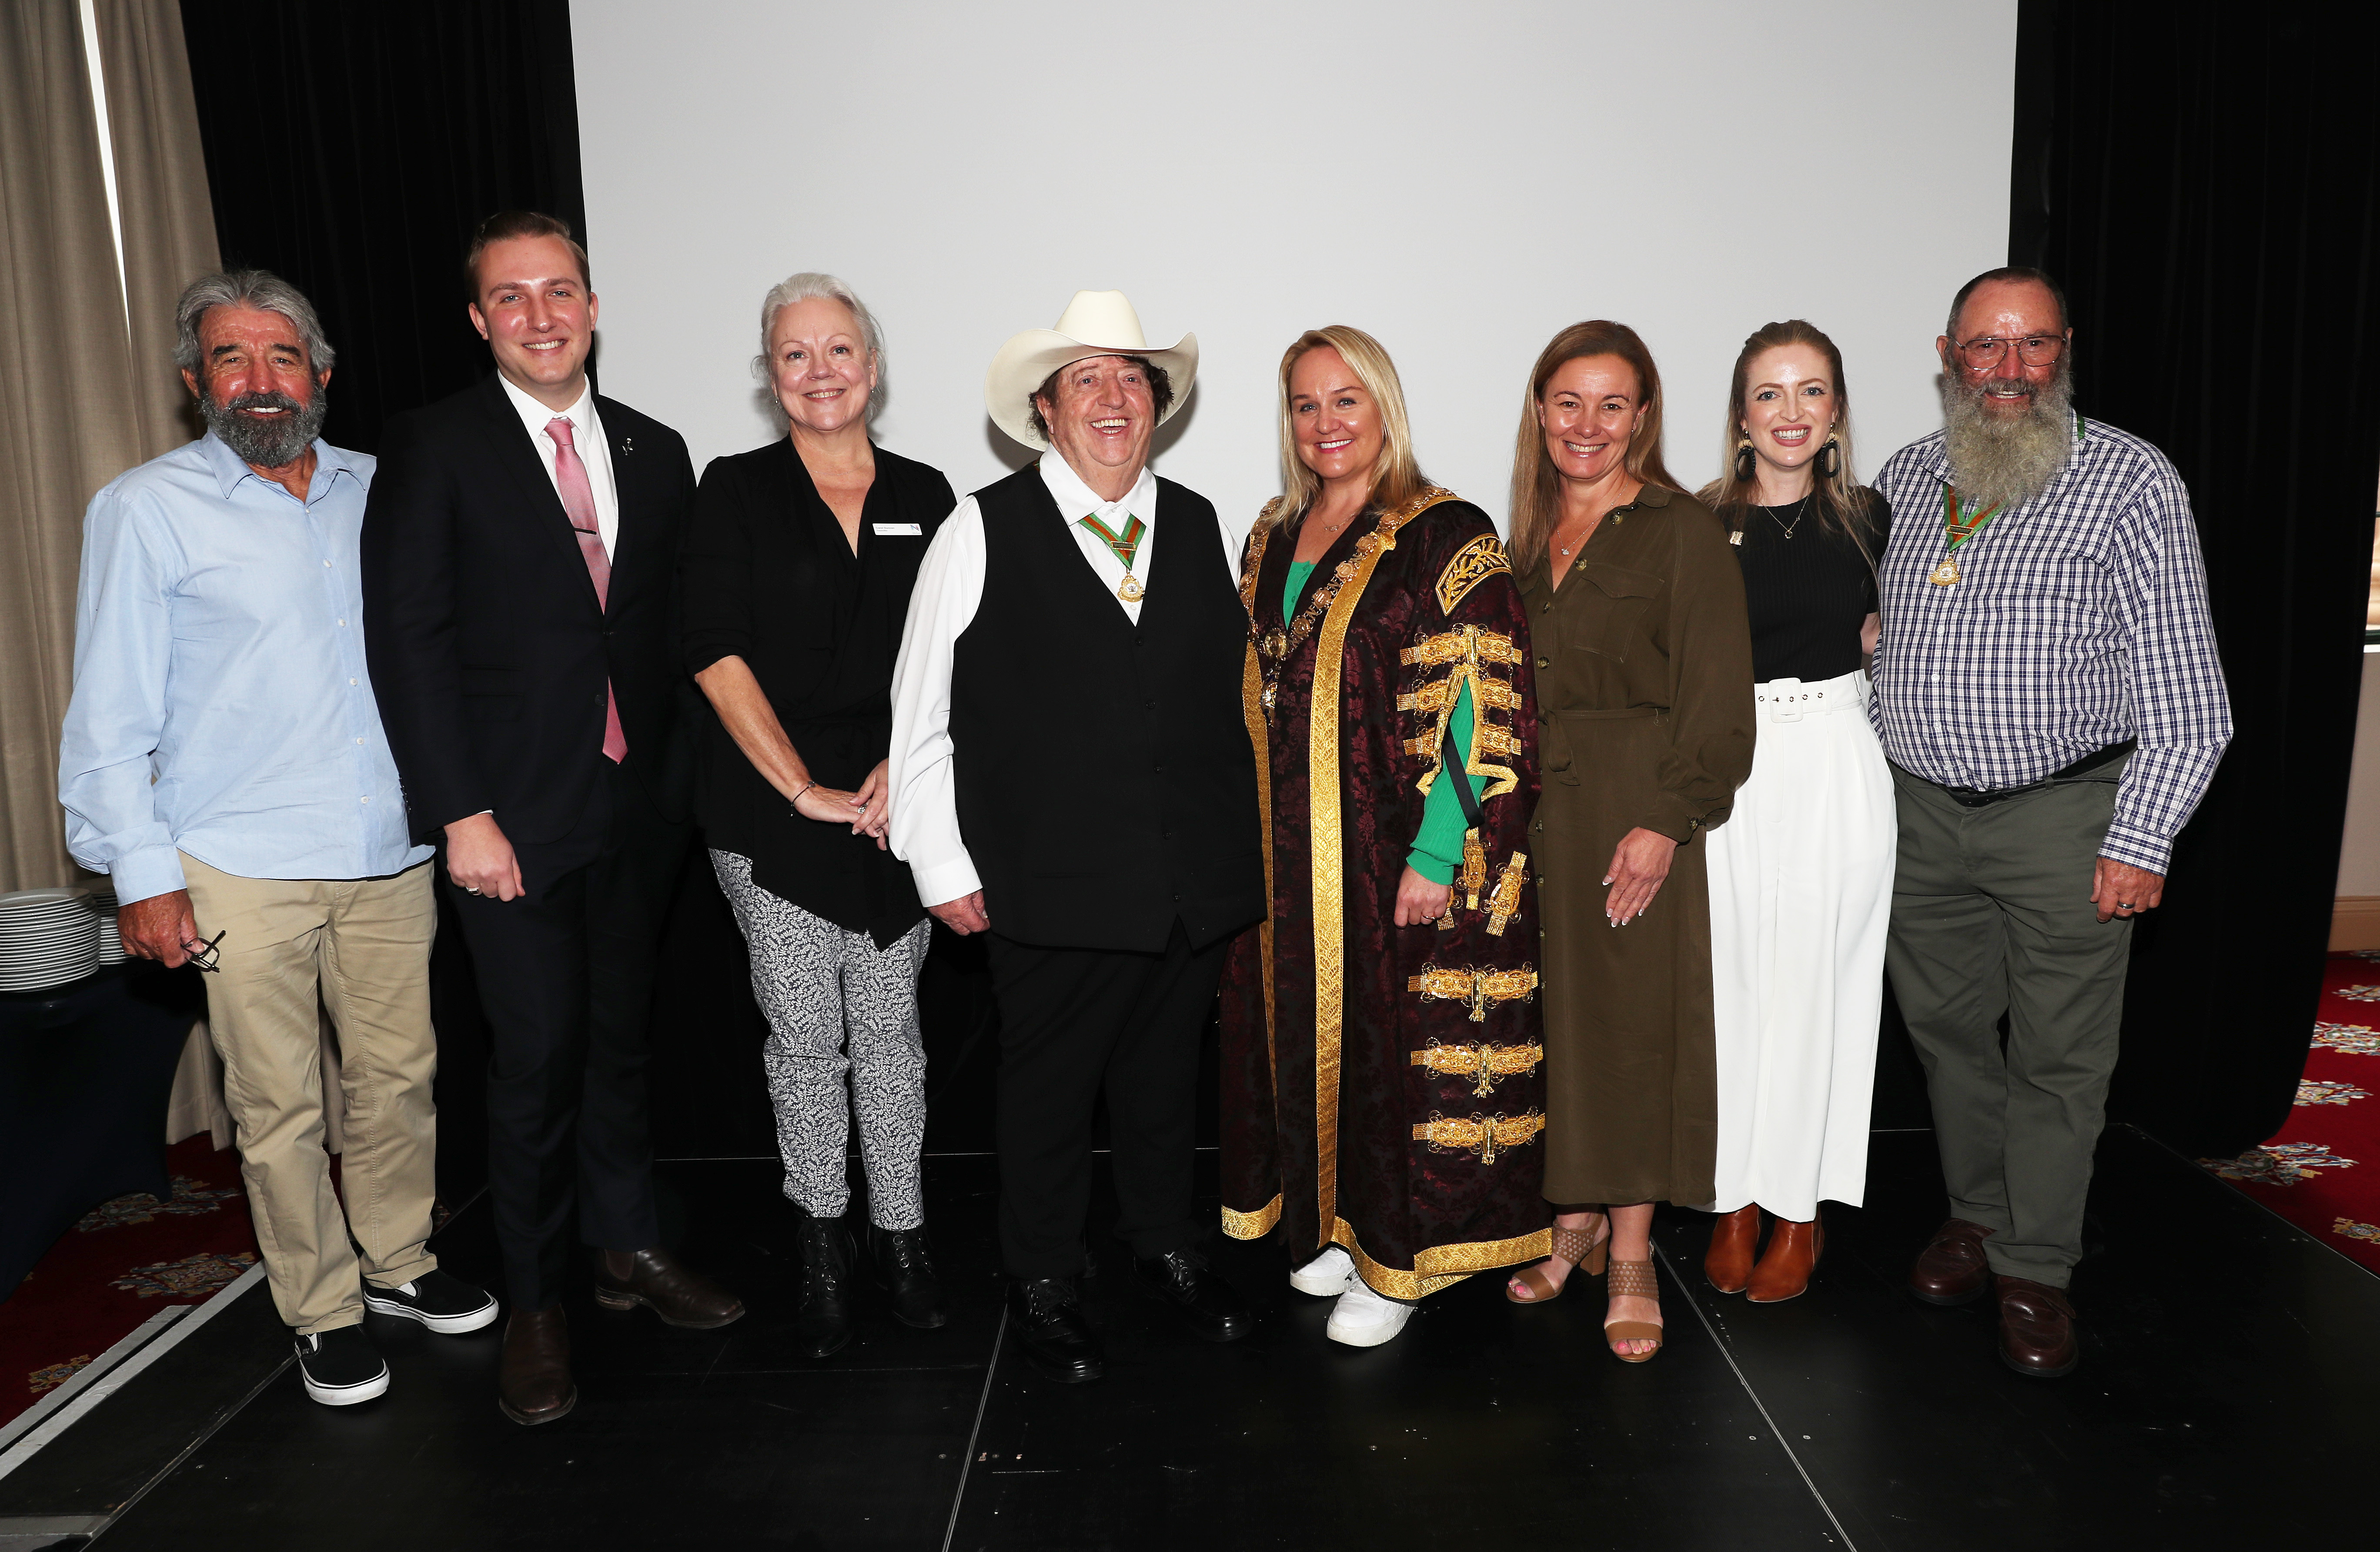 Phil-Mahoney-at-today-s-Freeman-of-the-City-ceremony-with-Lord-Mayor-Nuatali-Nelmes-and-guests.JPG